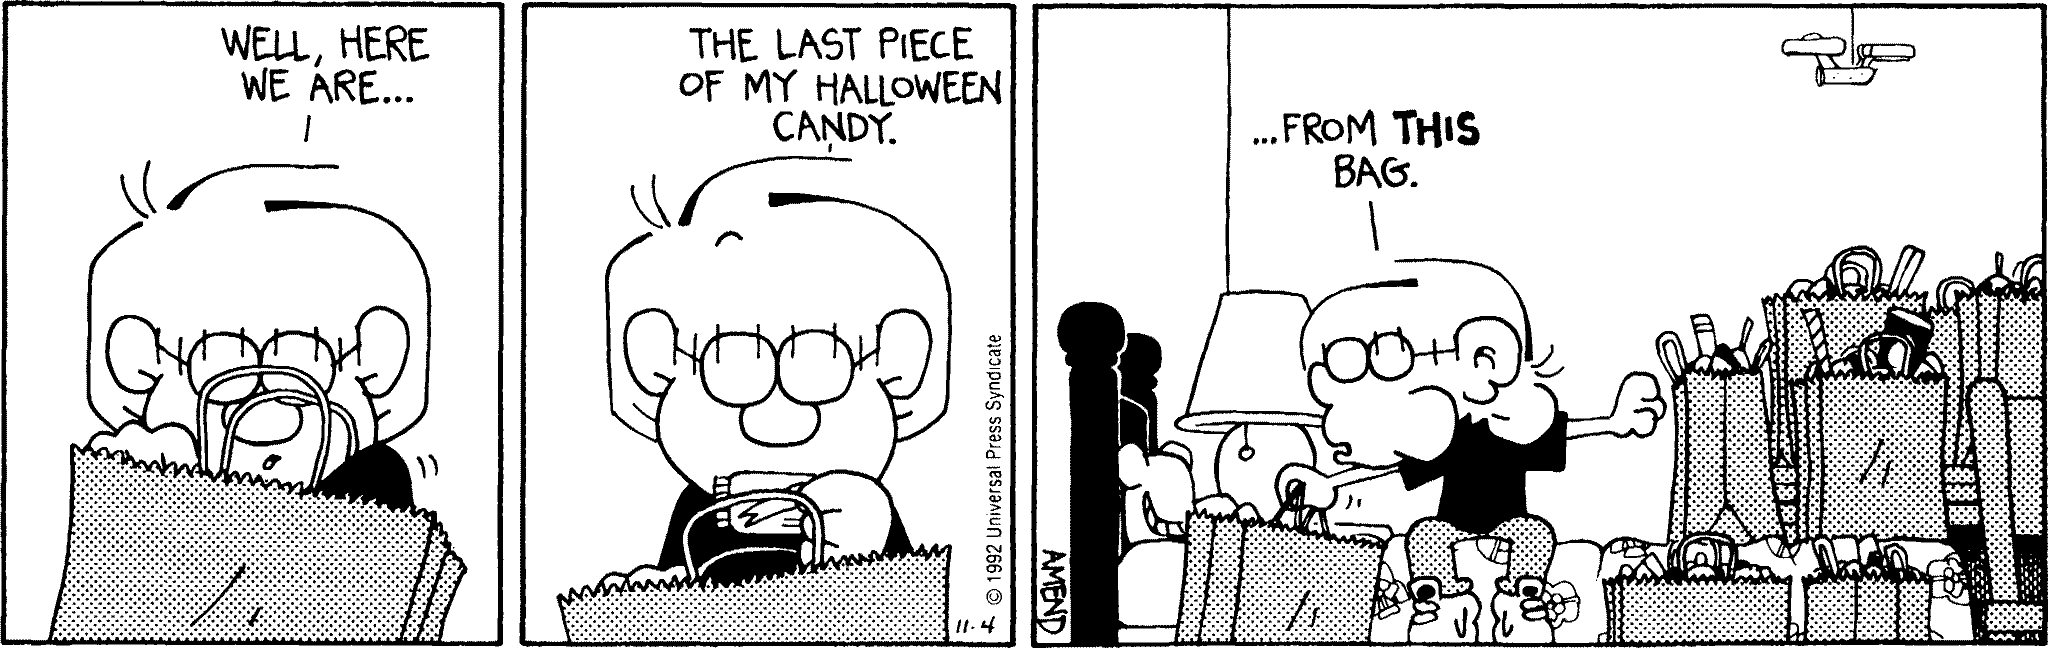 Halloween Comics - FoxTrot comic strip by Bill Amend - Published November 4, 1992 - Jason Fox: Well, here we are... the last piece of my halloween candy.... from this bag.